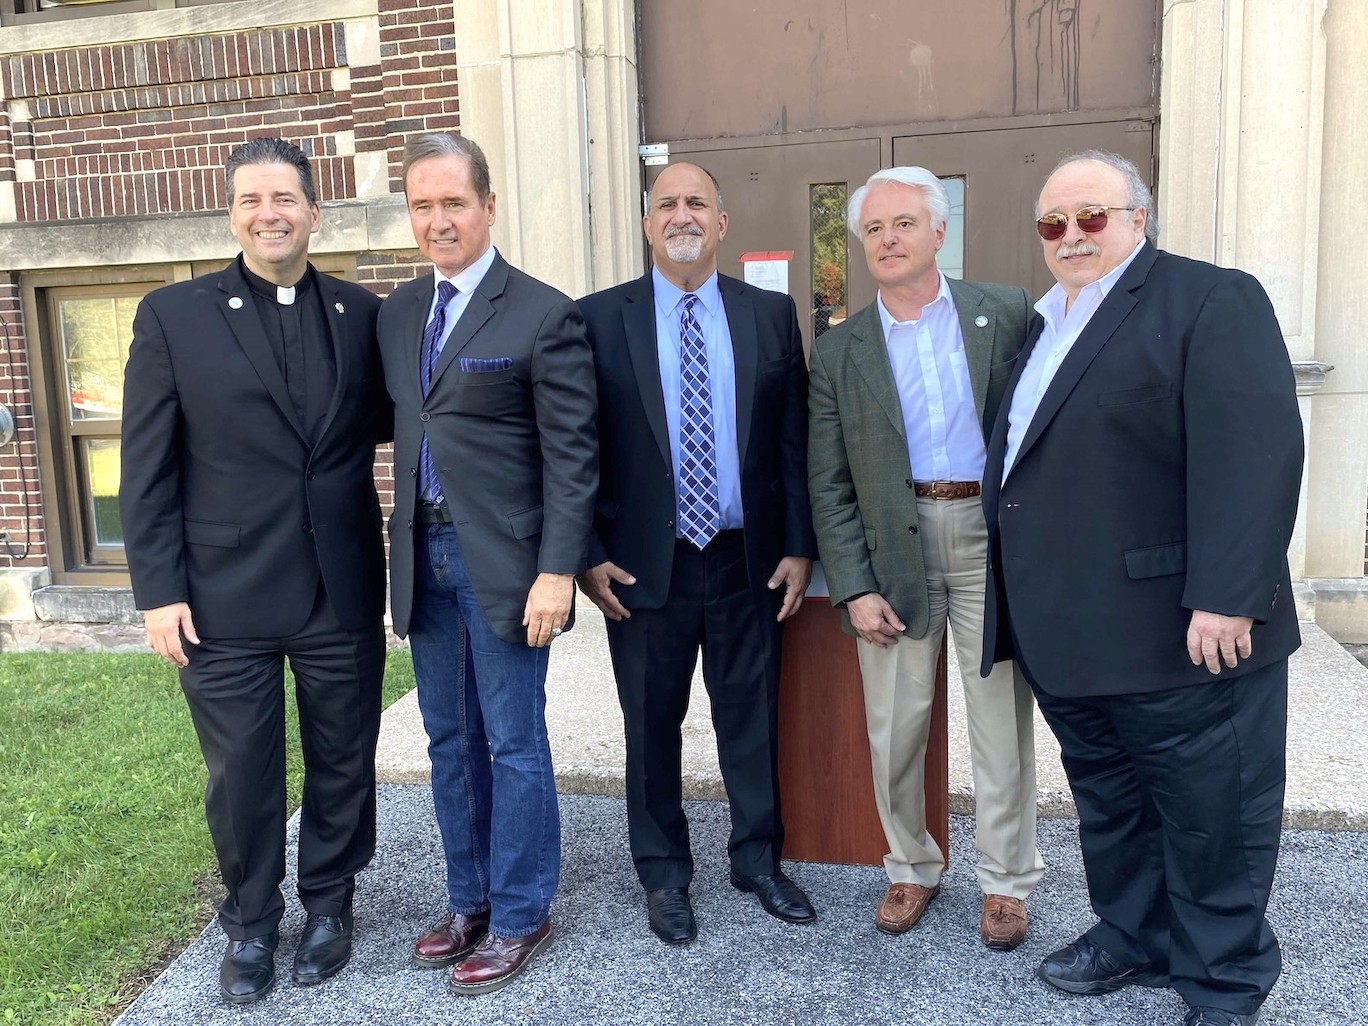 Pictured, from left, at a Thursday press conference are Niagara University President the Rev. James Maher, Congressman Brian Higgins, Niagara Falls City School District Superintendent Mark Laurrie, Mayor Robert Restaino and Russ Petrozzi. (Submitted photo)